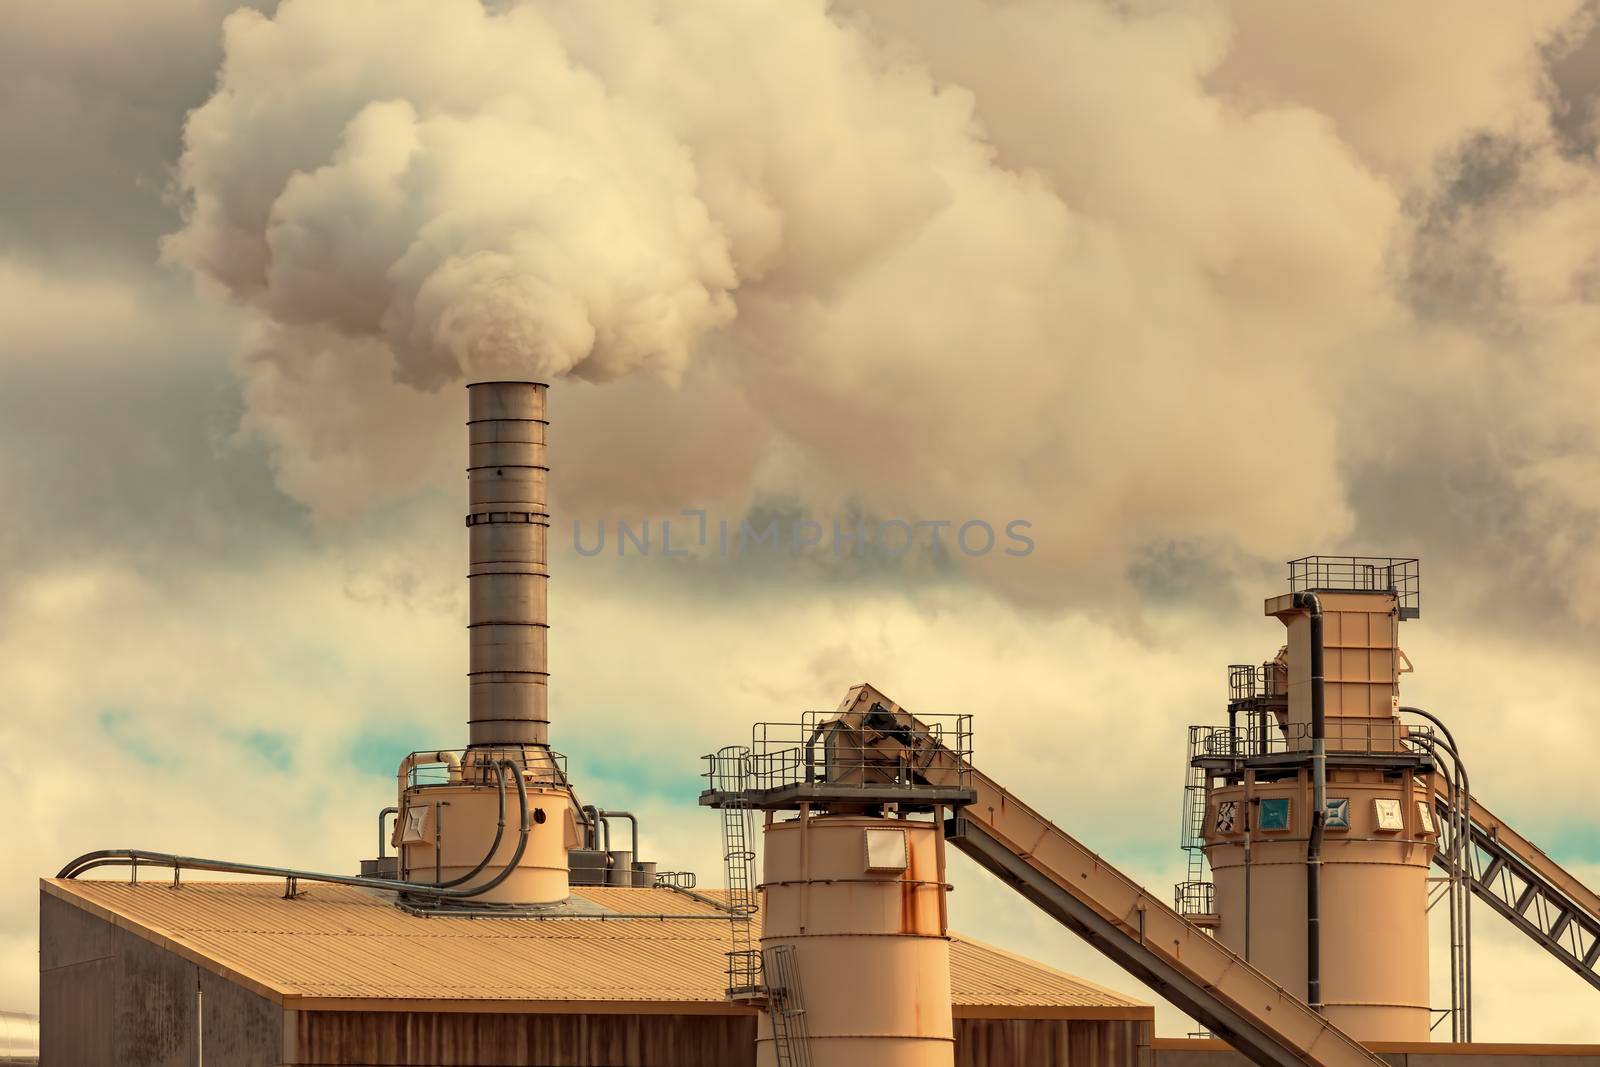 A large manufacturing facility with steam coming from chimney st by WittkePhotos